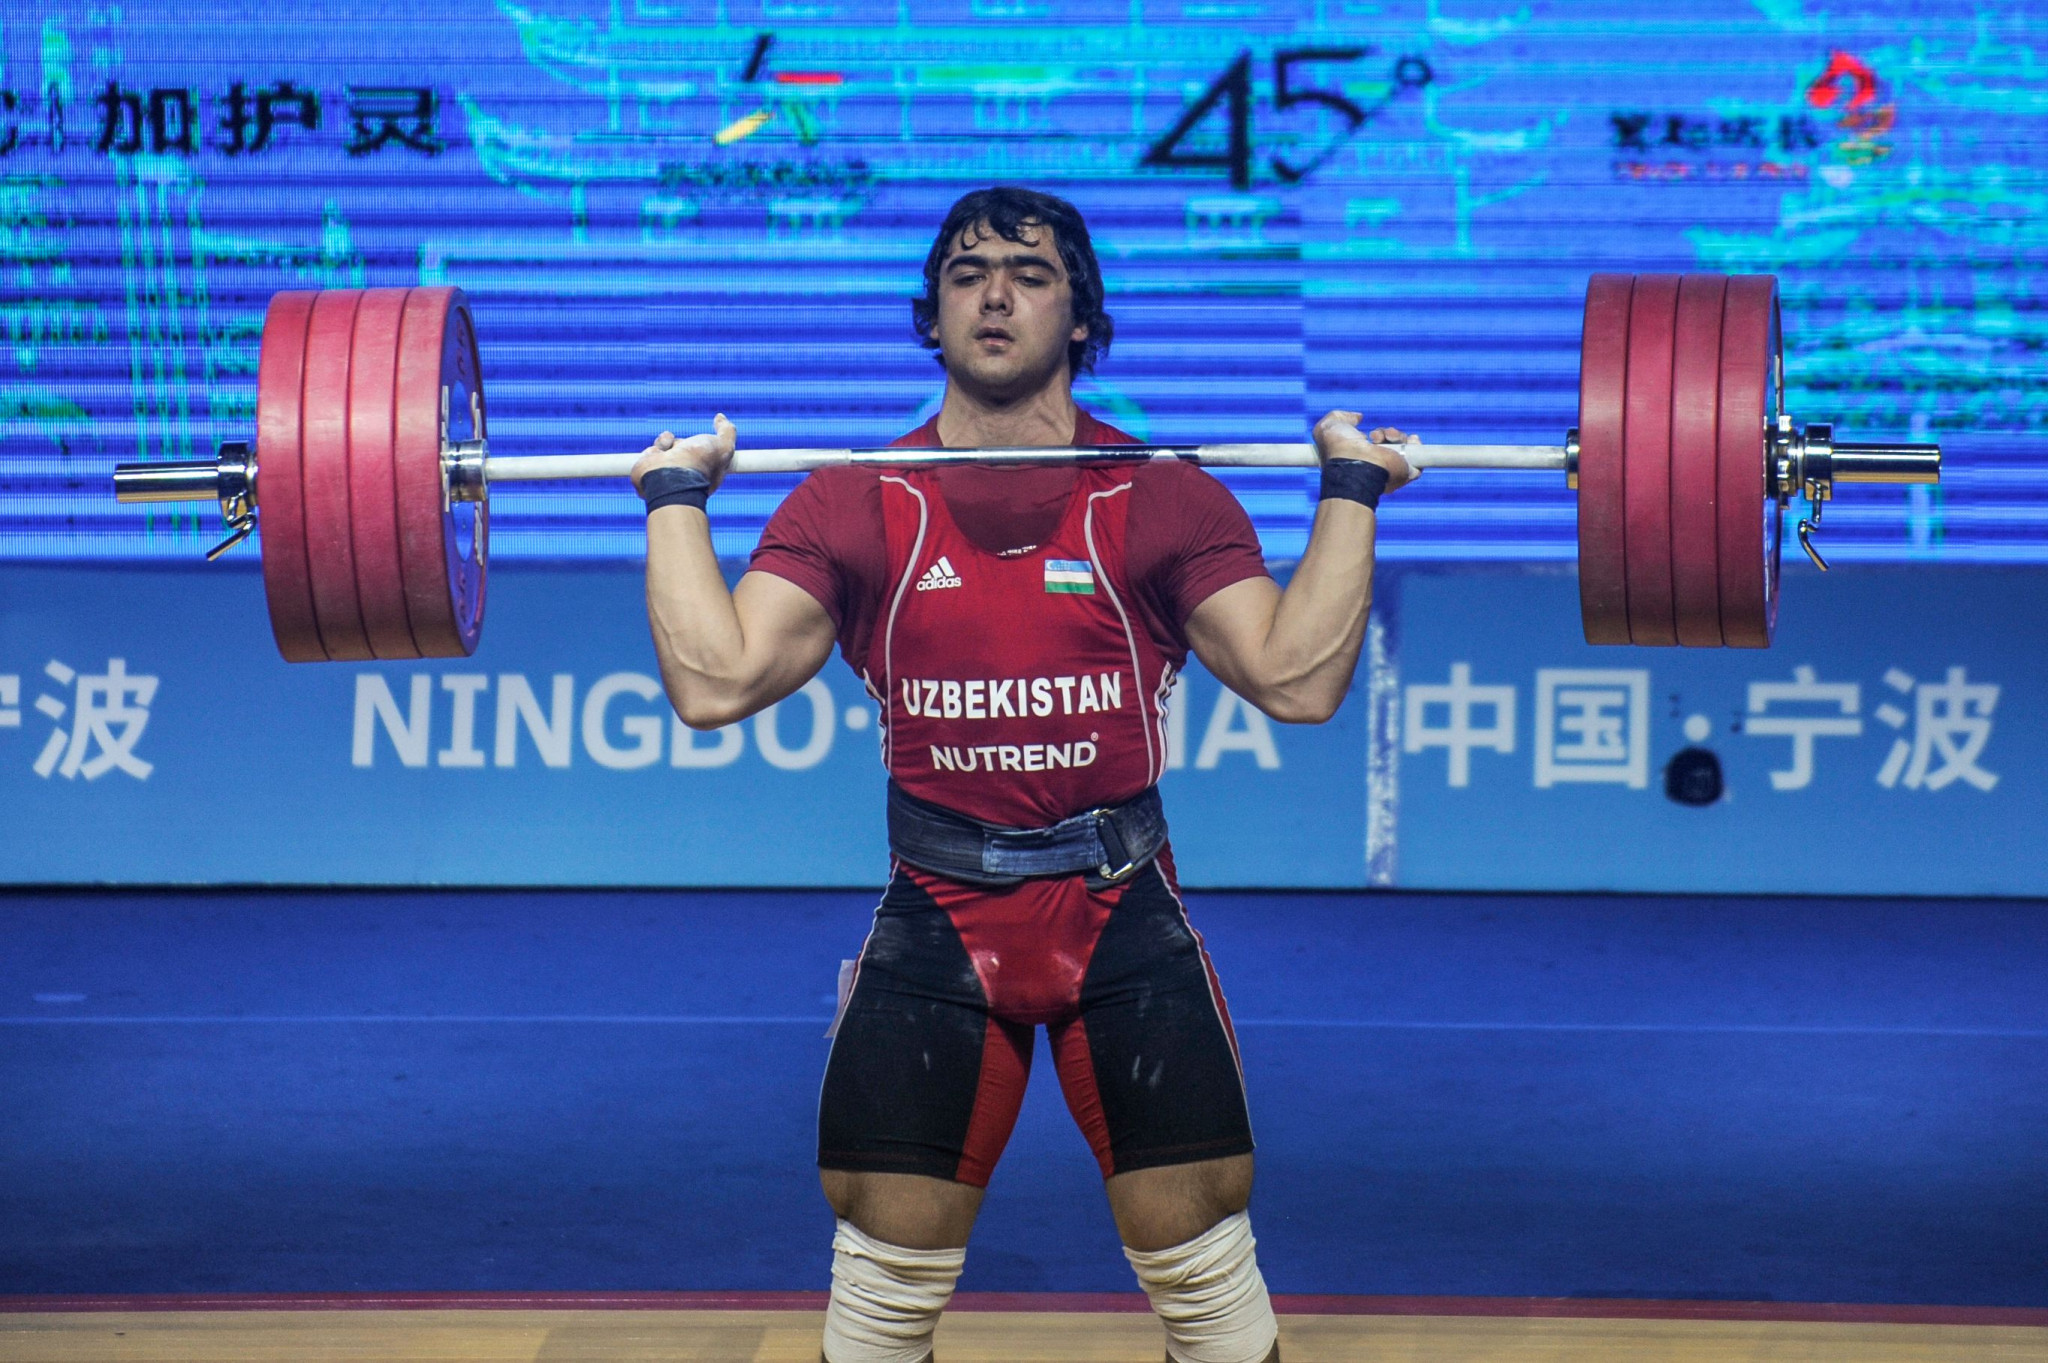 Akbar Djuraev did not need to find his best form to win gold but was still impressive ©Getty Images